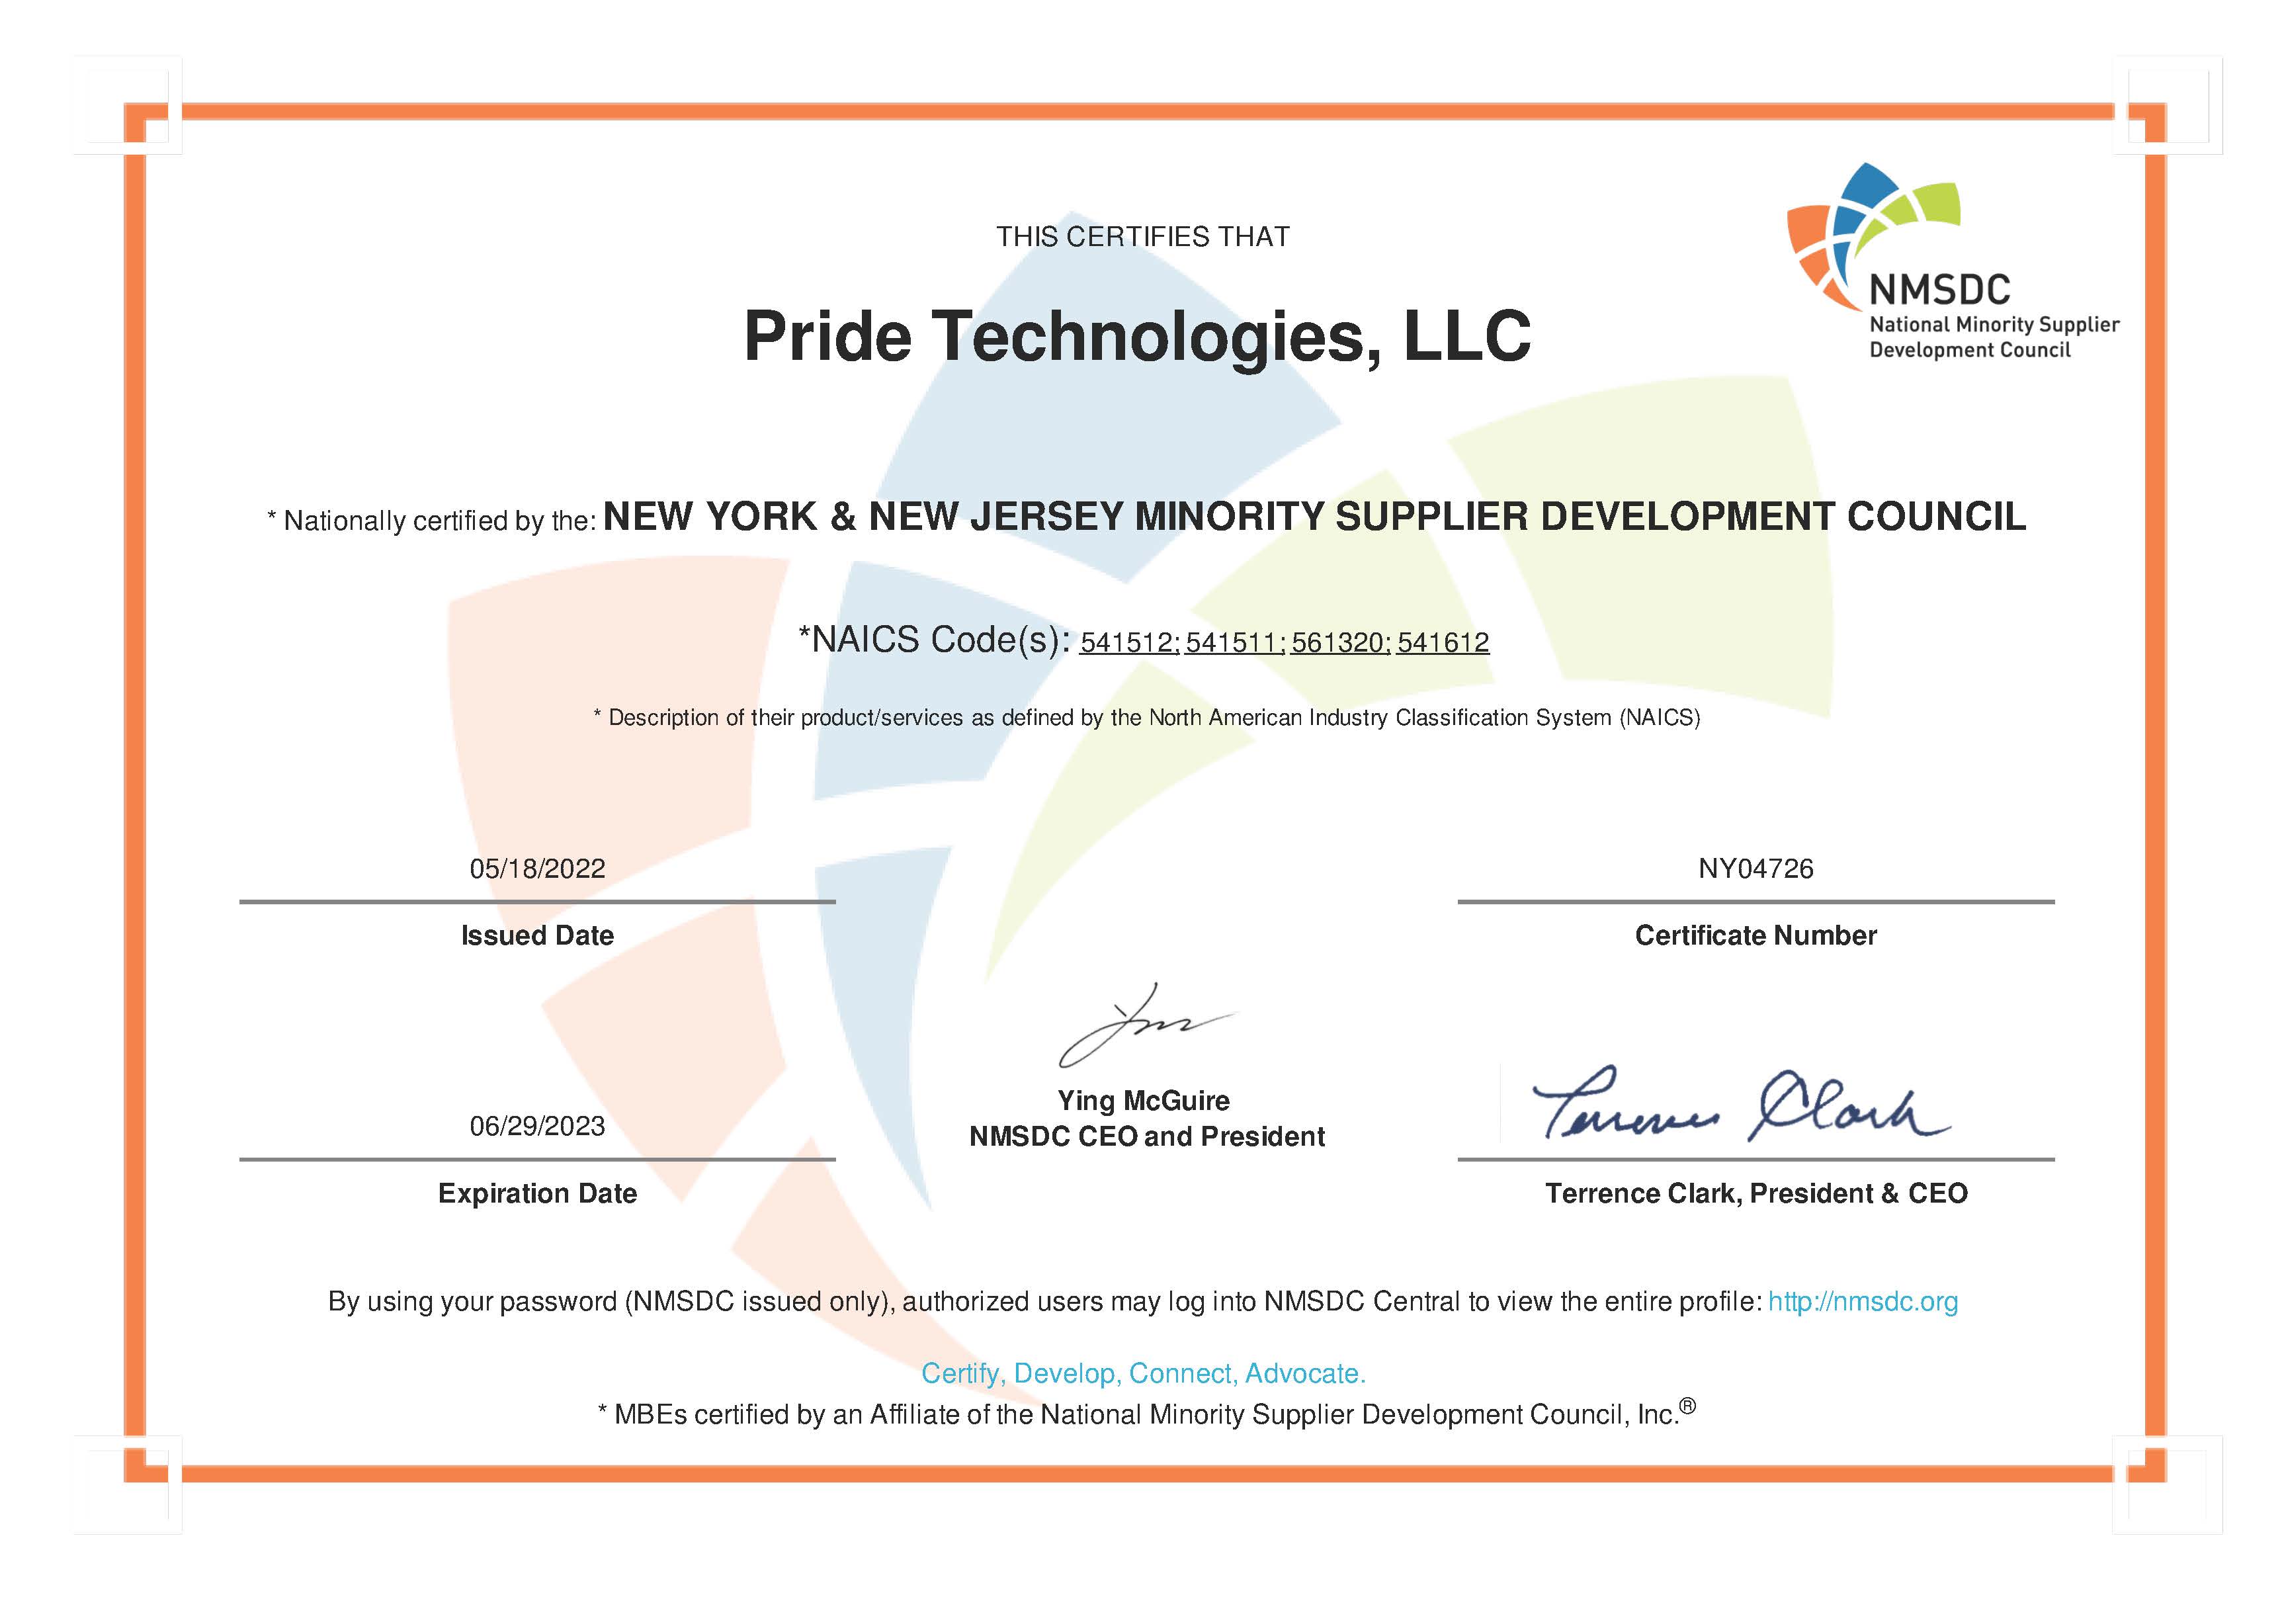 Certification of Pride Technologies